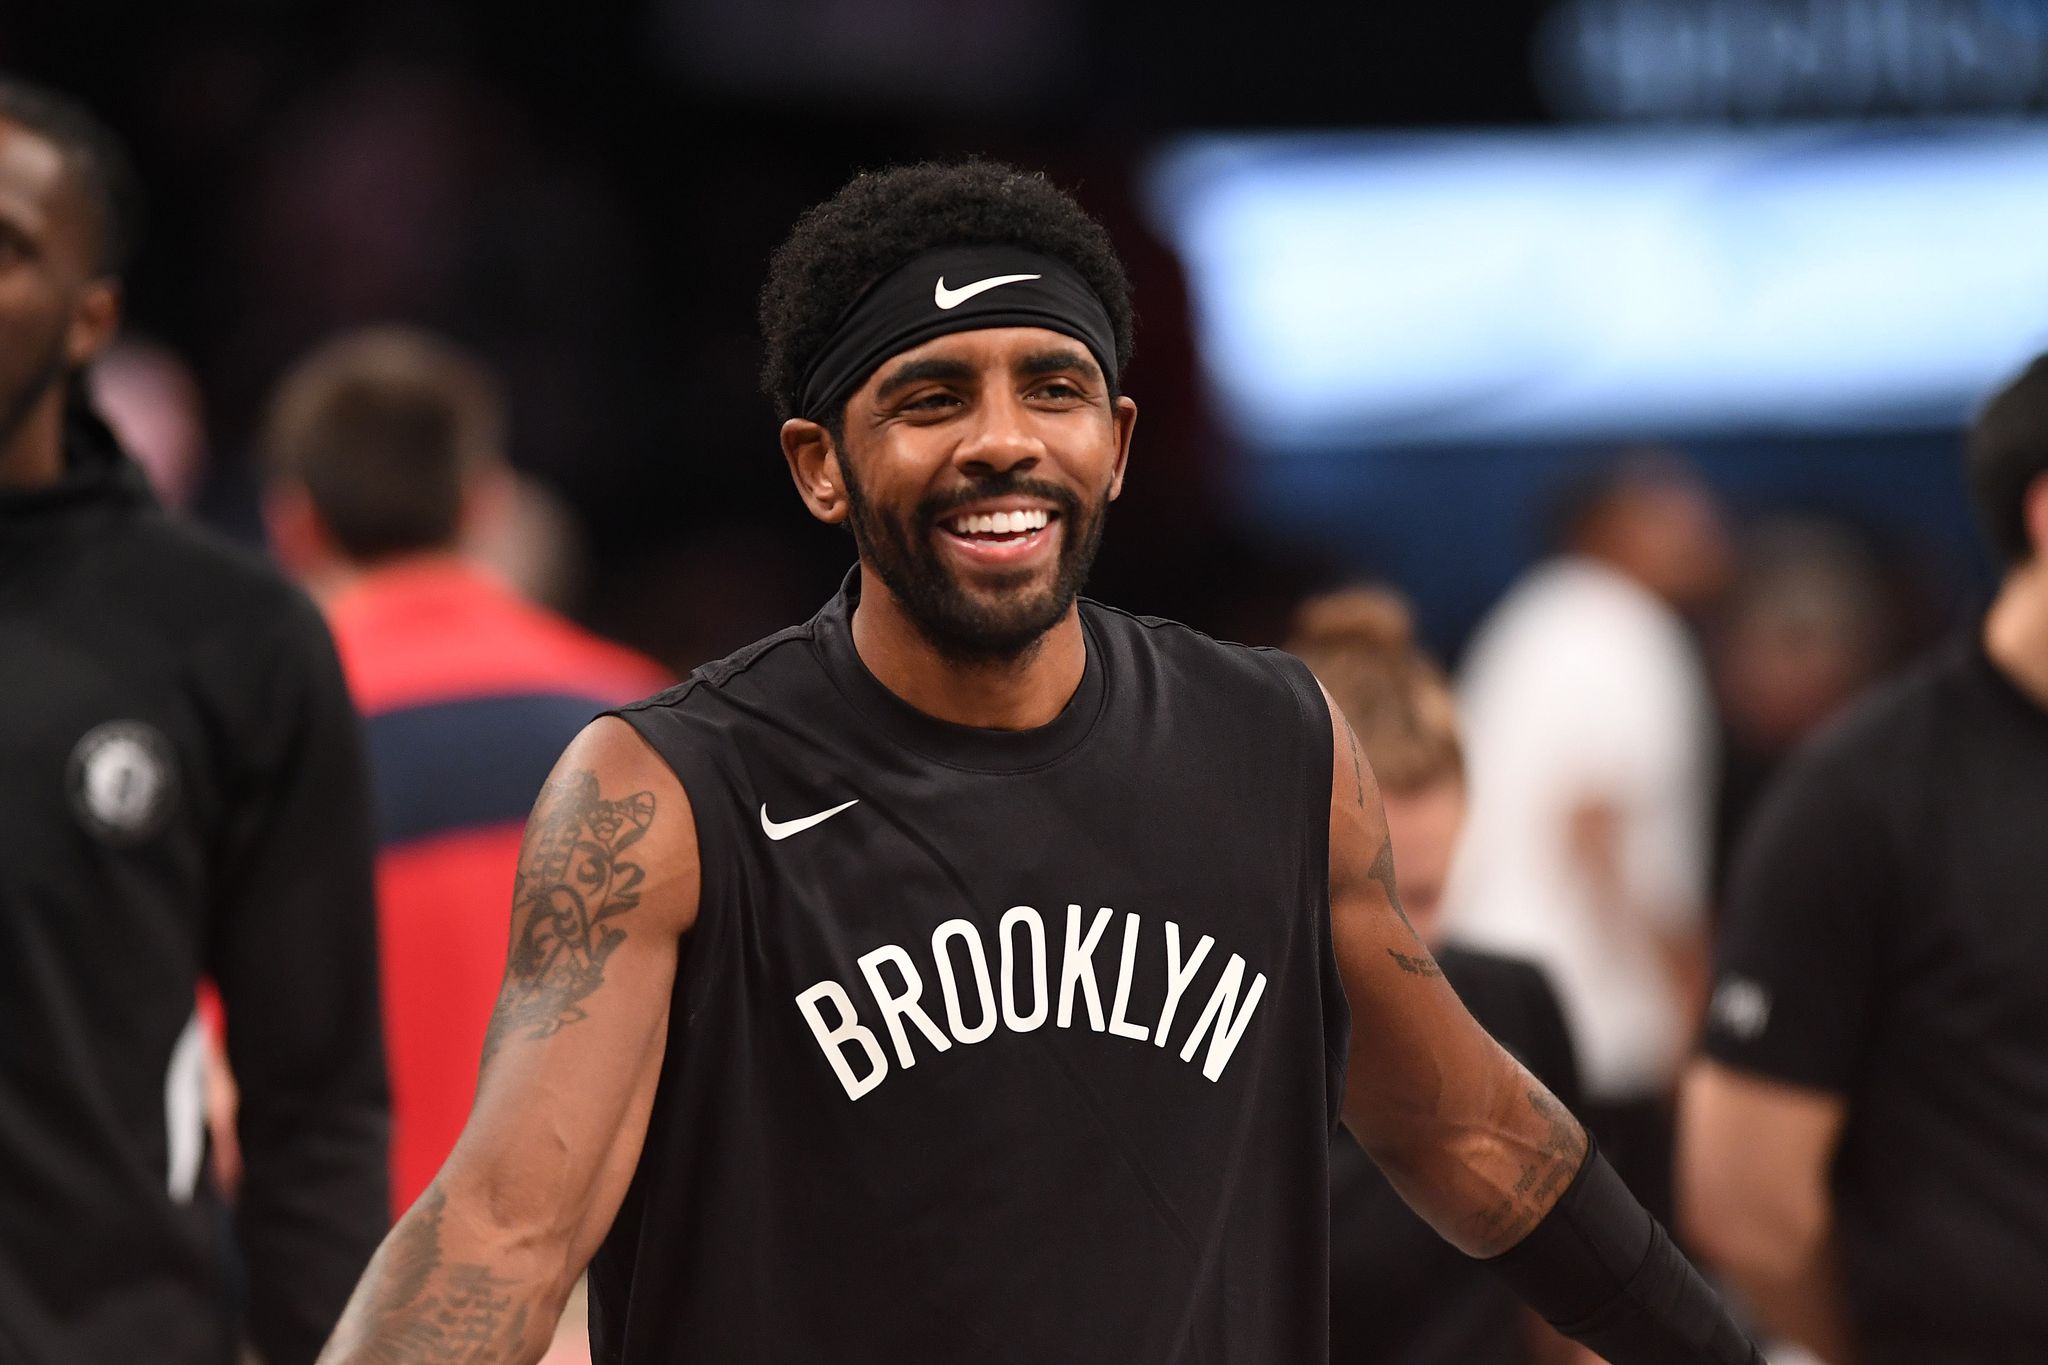  Kyrie Irving at Barclays Center in November 2019 in New York City | Source: Getty Images